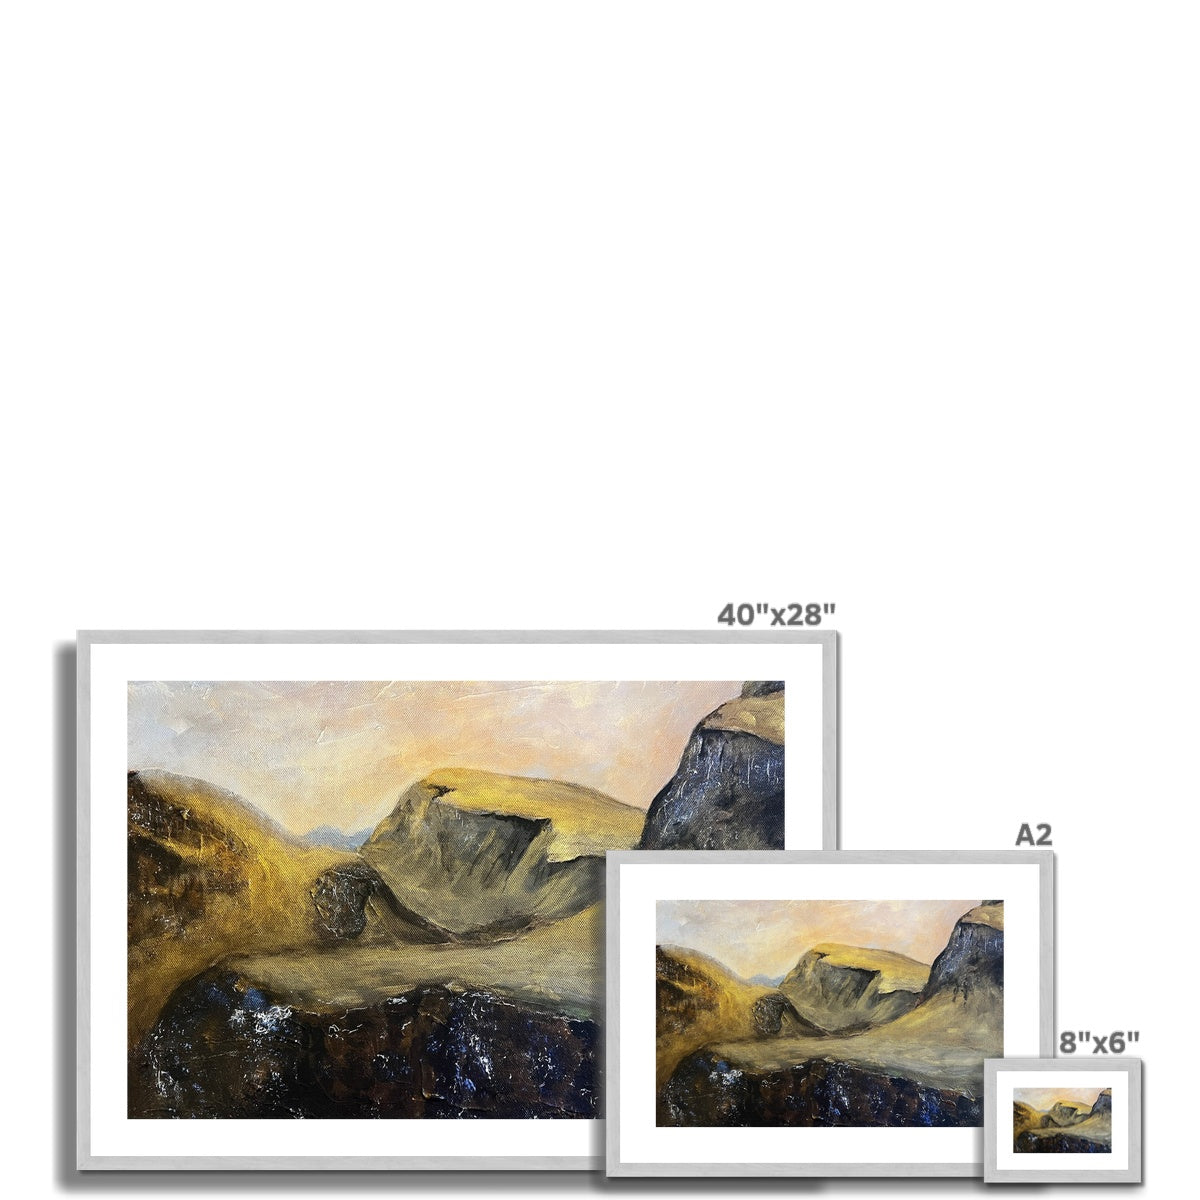 The Quiraing Skye Painting | Antique Framed & Mounted Prints From Scotland-Antique Framed & Mounted Prints-Skye Art Gallery-Paintings, Prints, Homeware, Art Gifts From Scotland By Scottish Artist Kevin Hunter